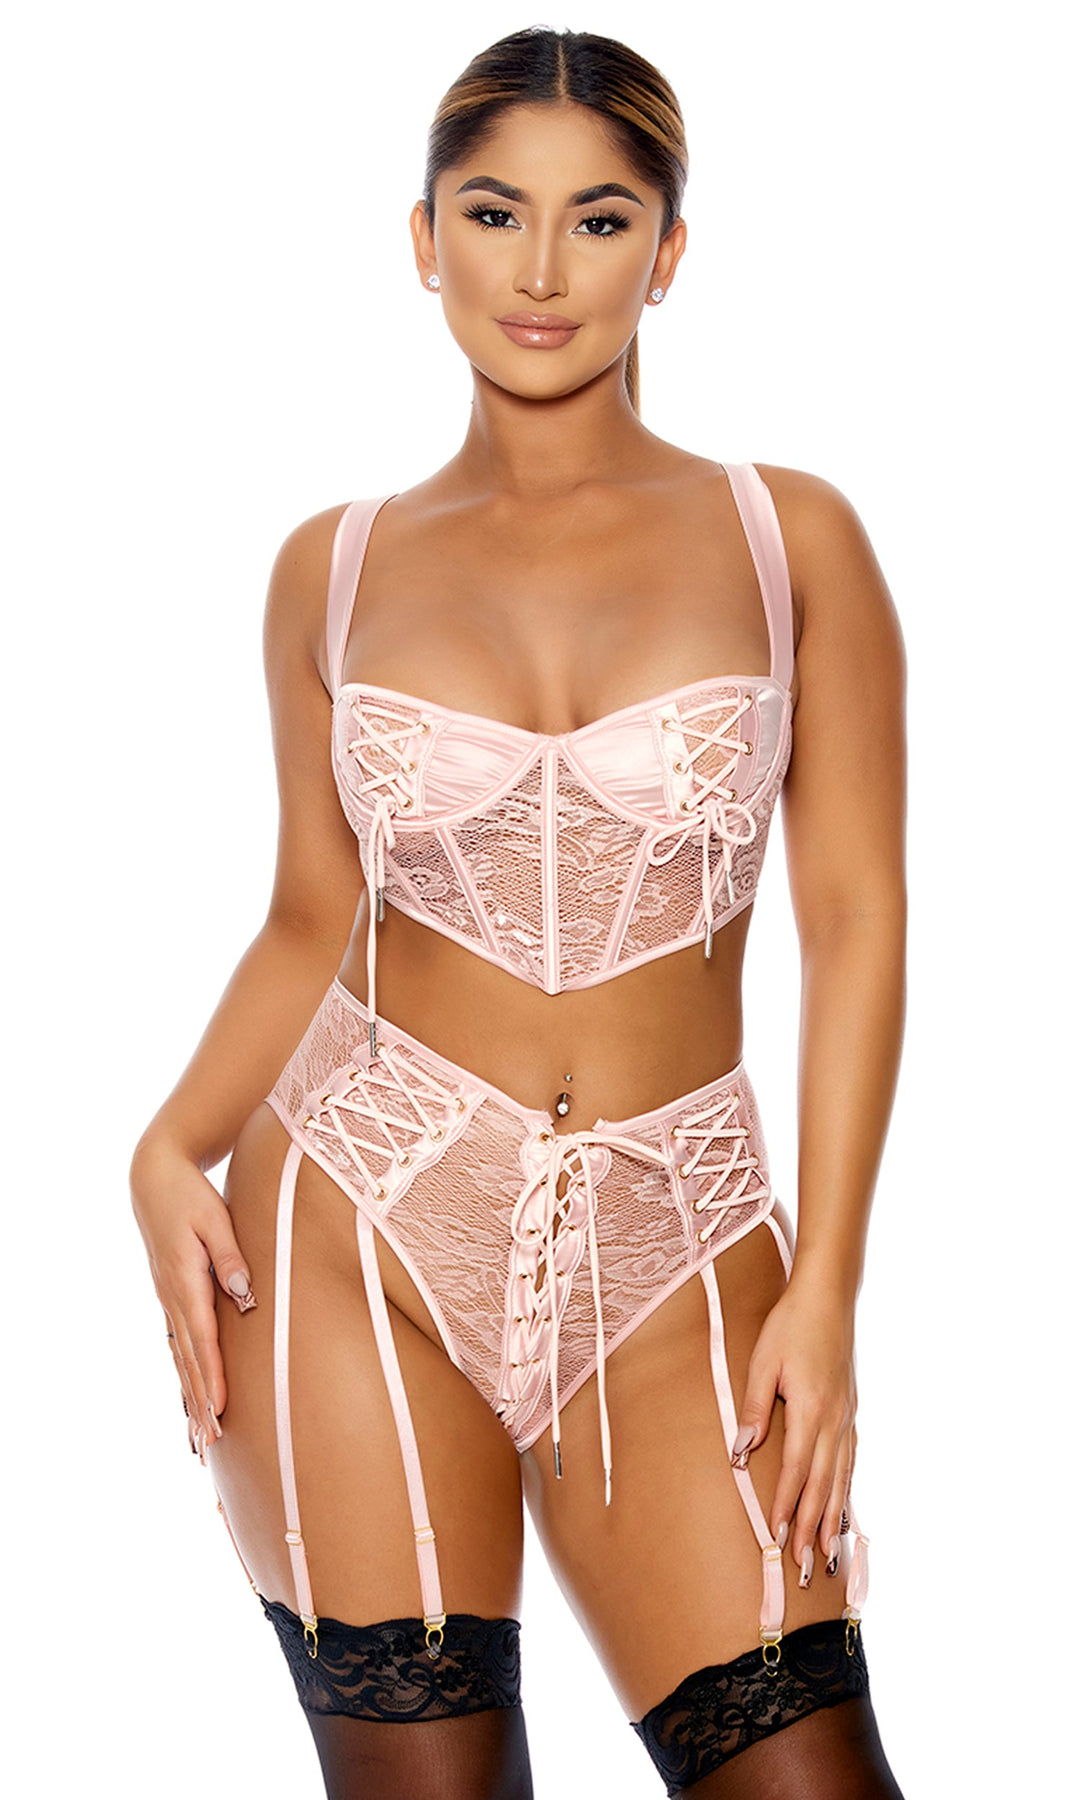 Forplay Womens Take to Heart Lingerie Set, Pink, Small 